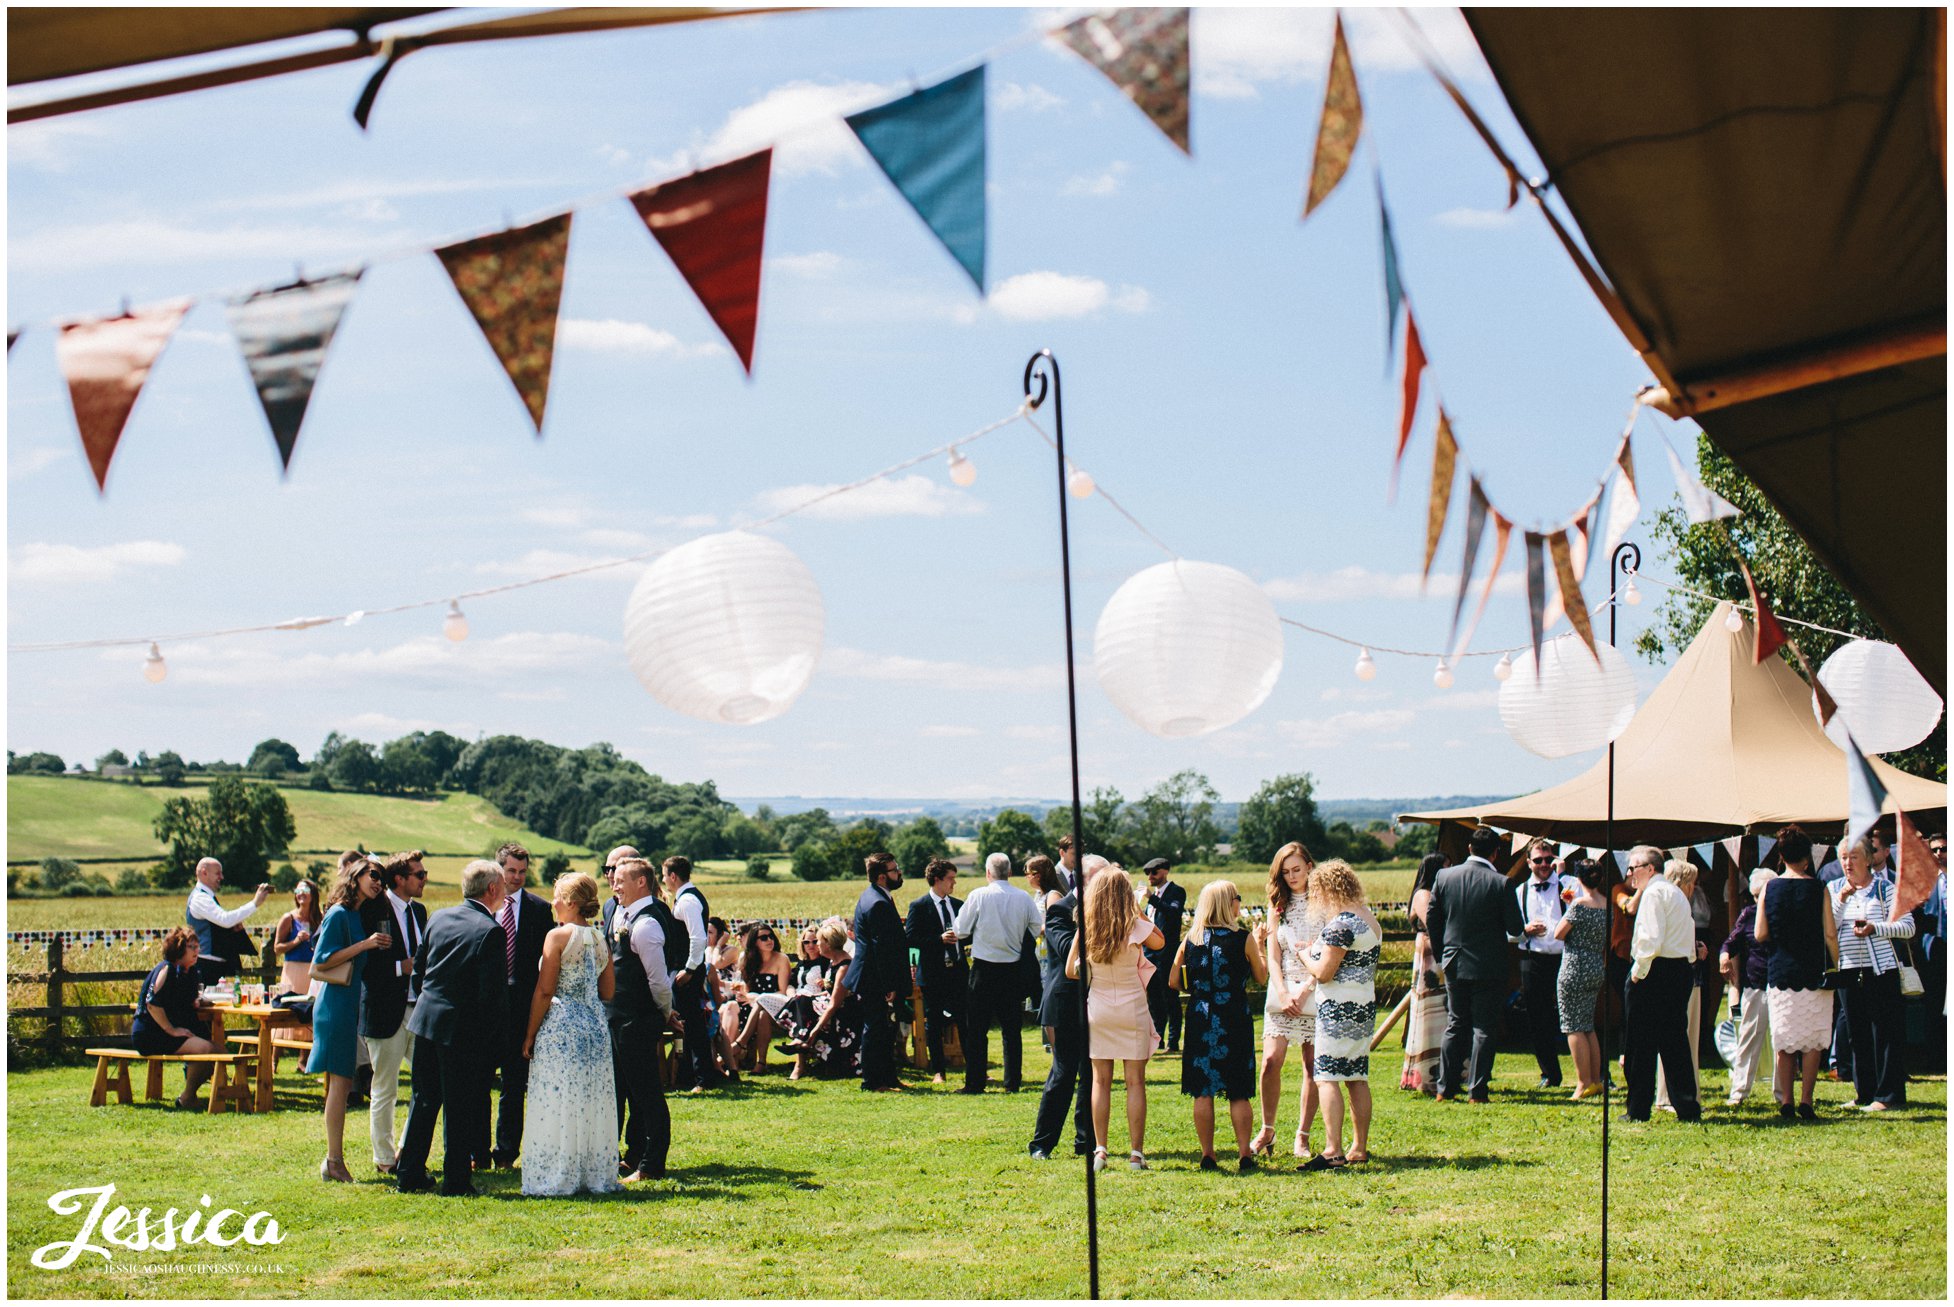 guests enjoy the sunshine at a sunny yorkshire wedding